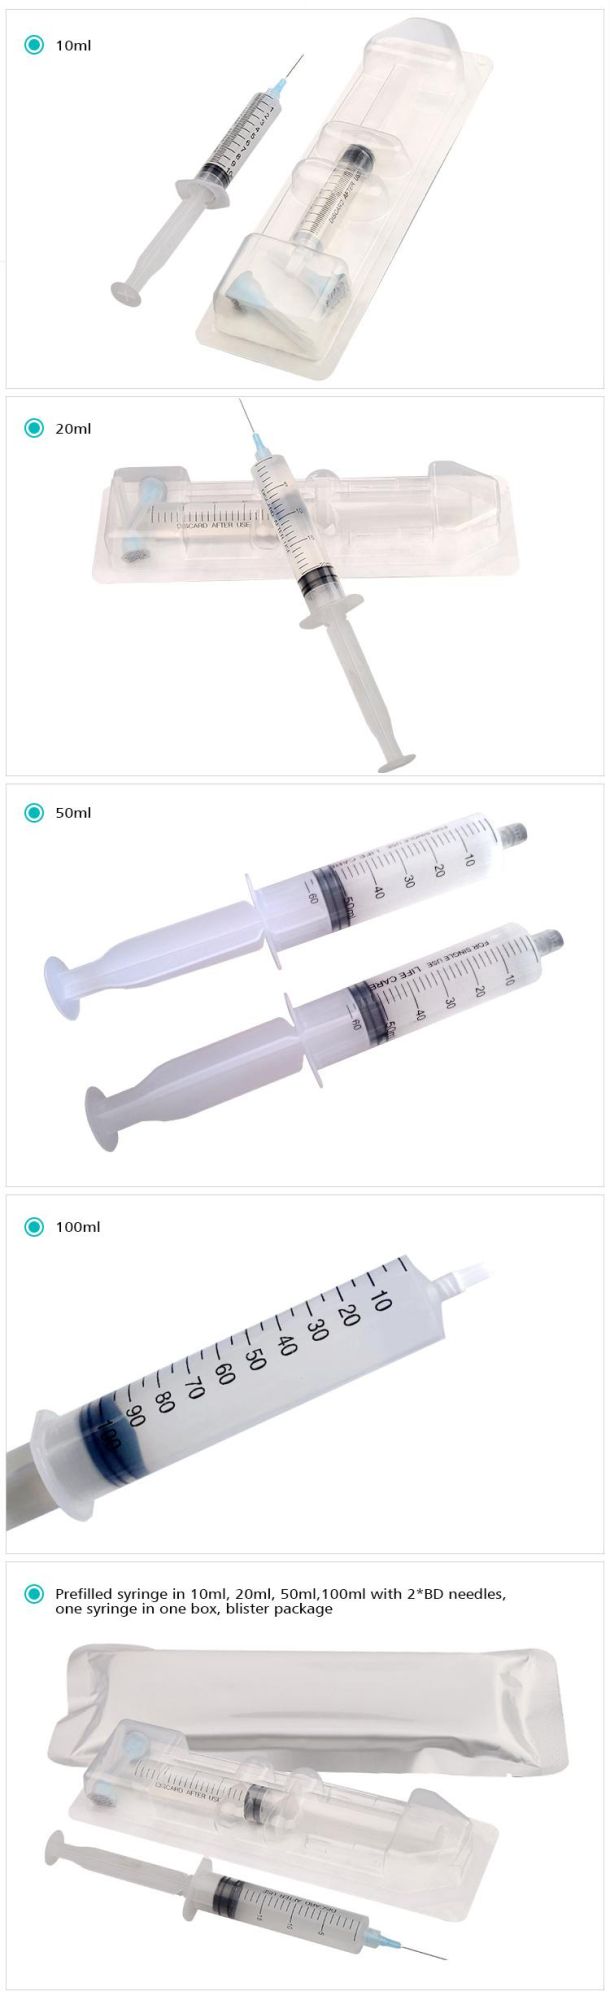 Manorui Product Ha Filler Cross Linked Inject 10ml Hyaluronic Acid Injections for Enlarger Buttock Breast Enlargement Gel